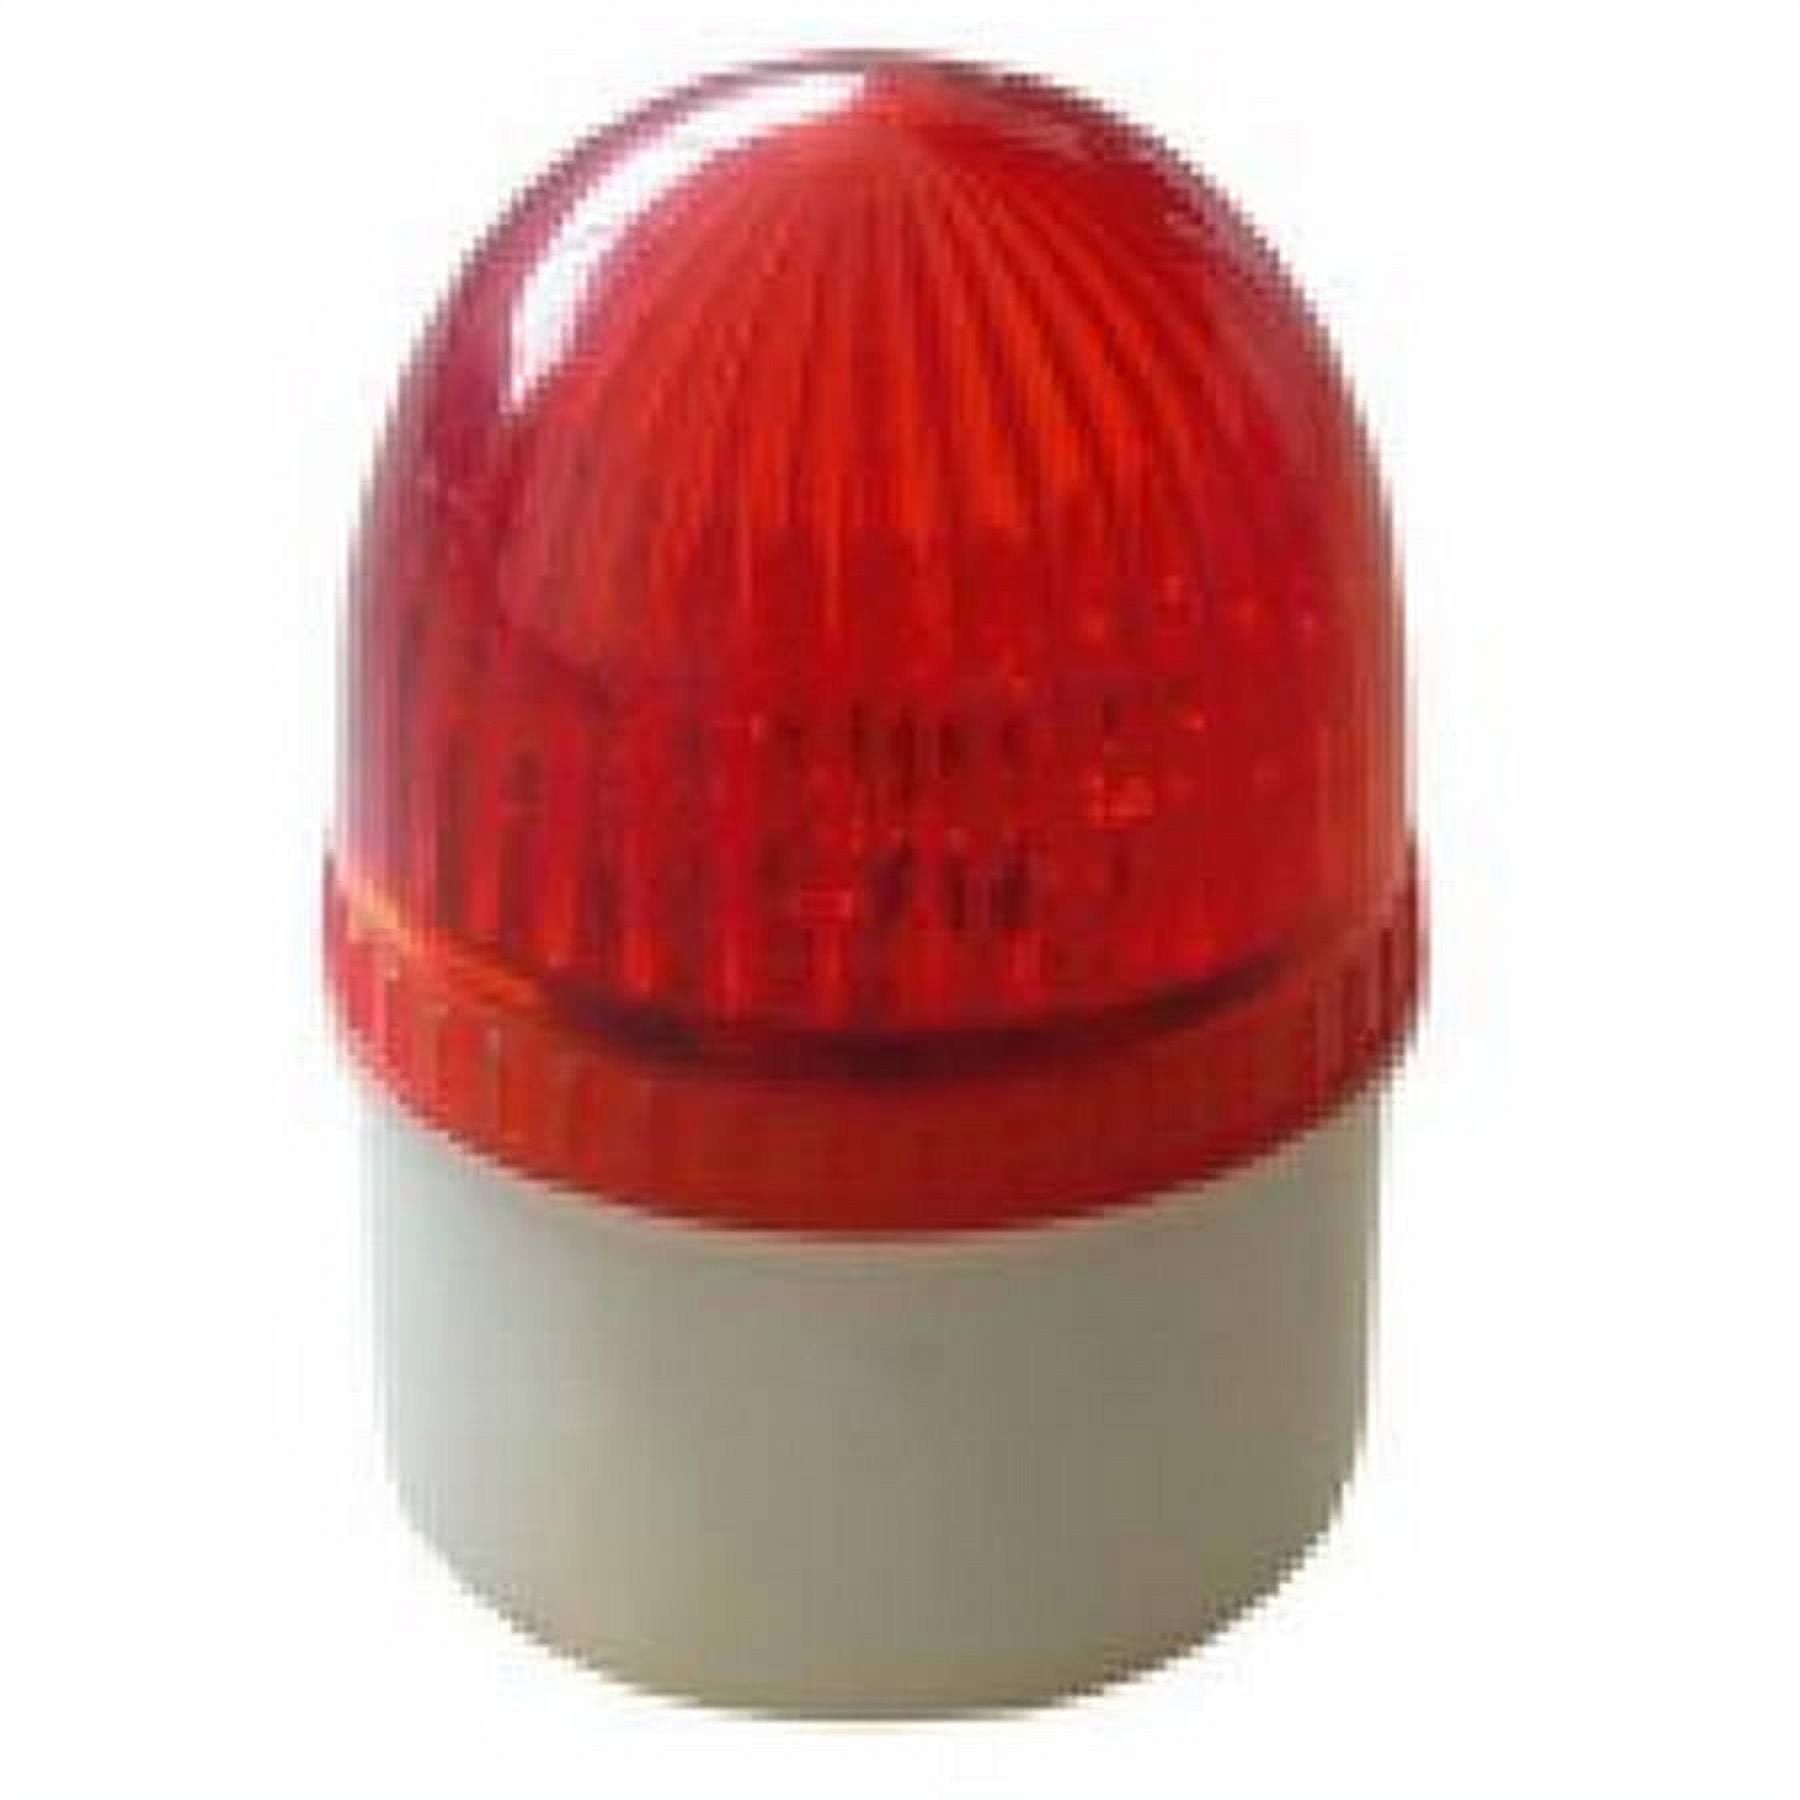 Picture of Aleko LM140110V-UNB Small Alarm Flash Lamp Siren for LM140 AC110V Gate Opener Operator